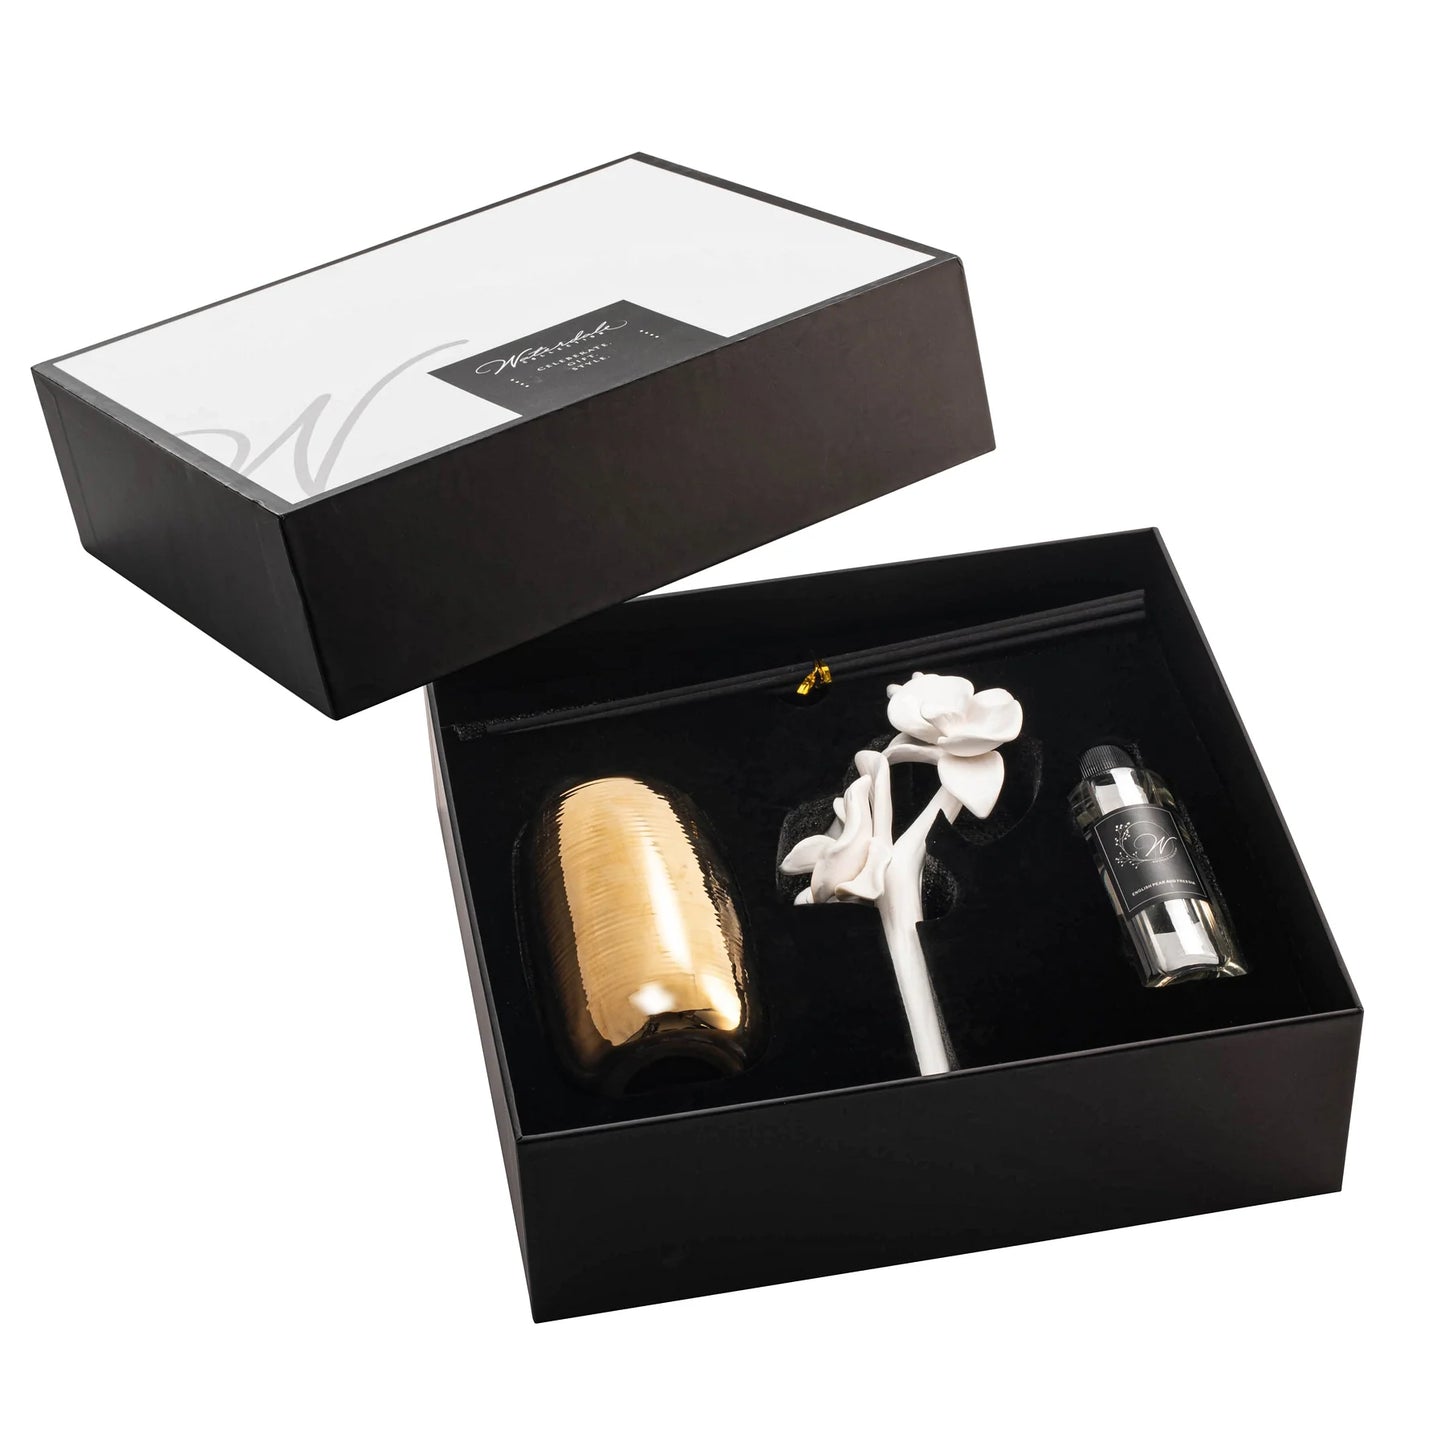 The Gold Fluted Scent Diffuser